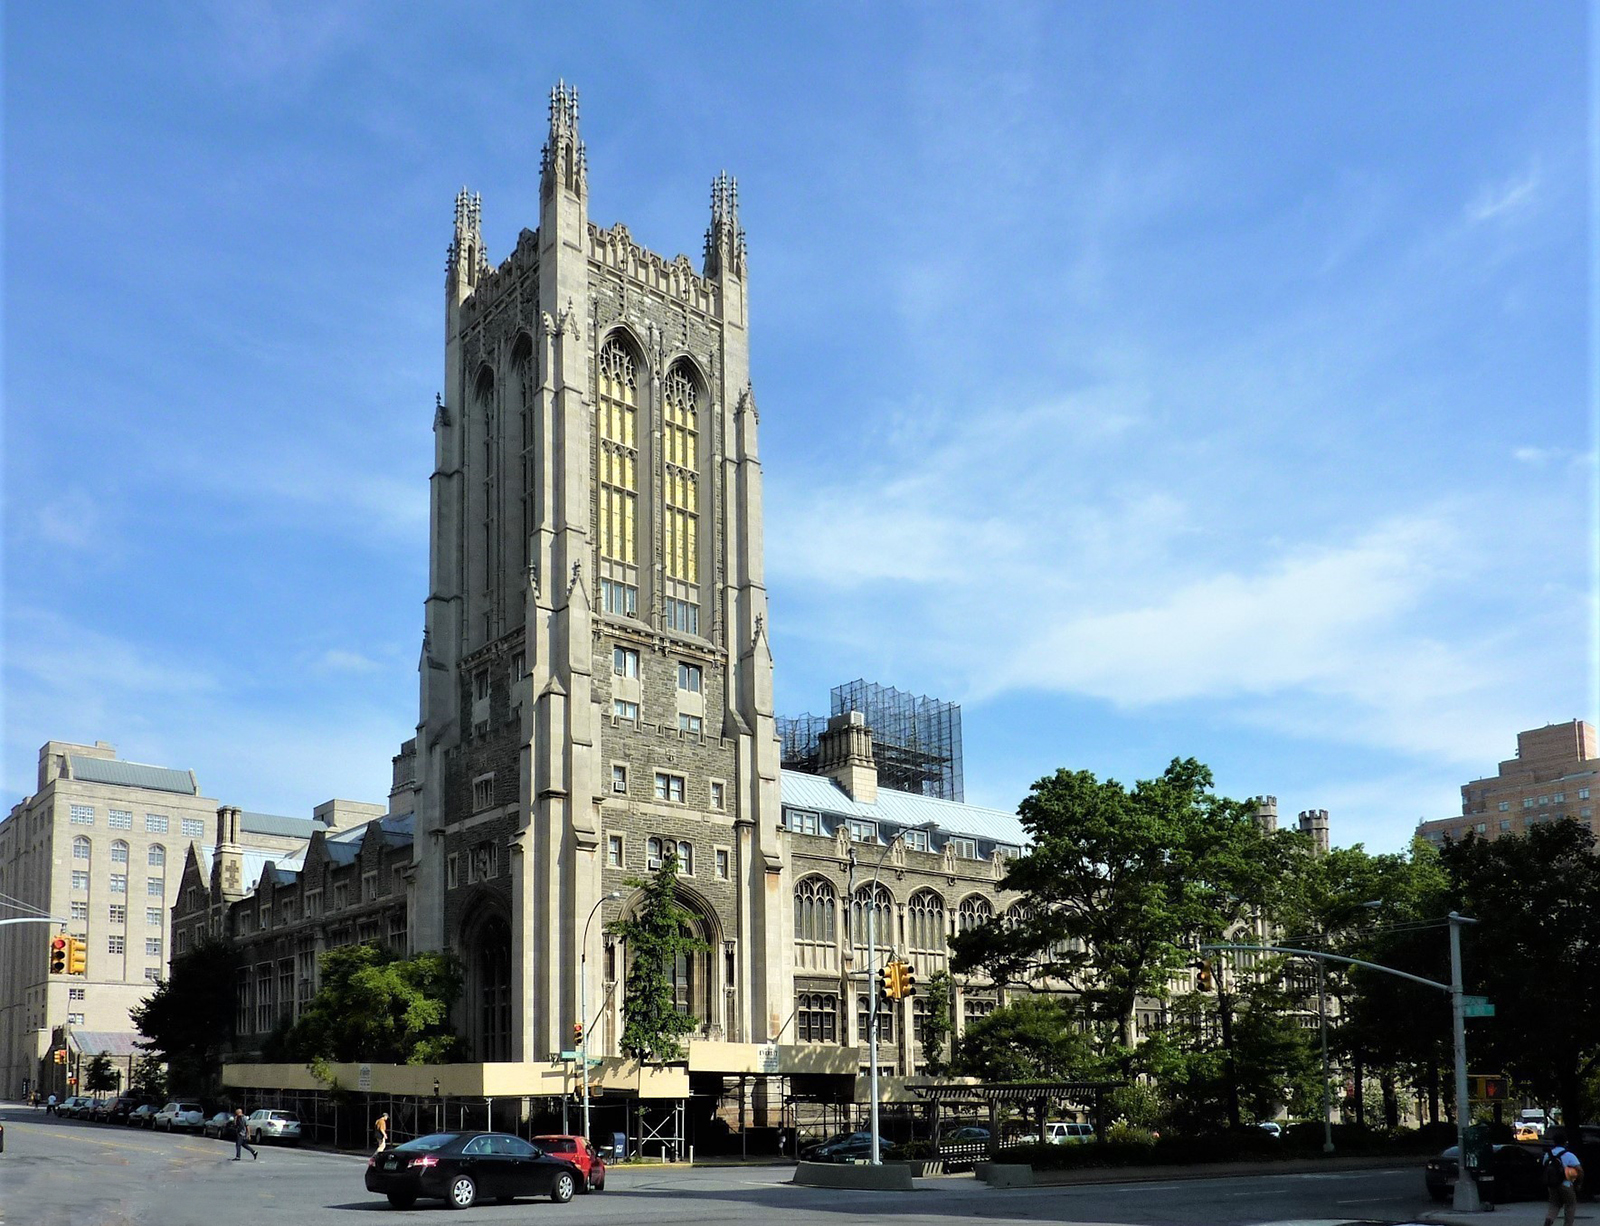 Brown Memorial Tower at Union Theological Seminary in New York. (Photo by Chris06/Wikimedia/Creative Commons)